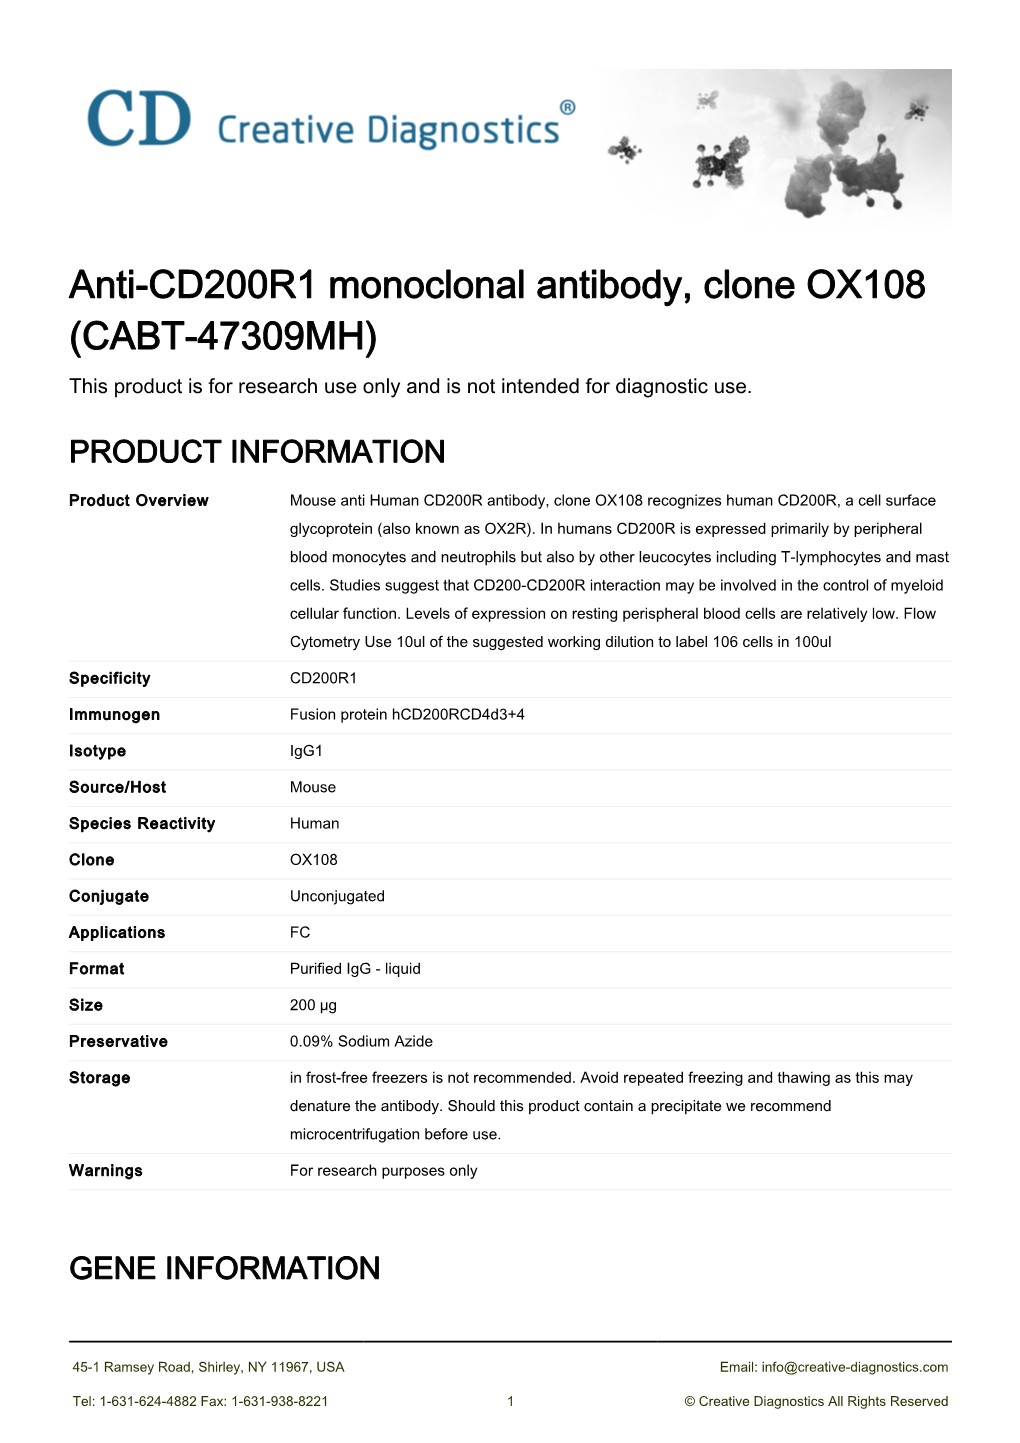 Anti-CD200R1 Monoclonal Antibody, Clone OX108 (CABT-47309MH) This Product Is for Research Use Only and Is Not Intended for Diagnostic Use